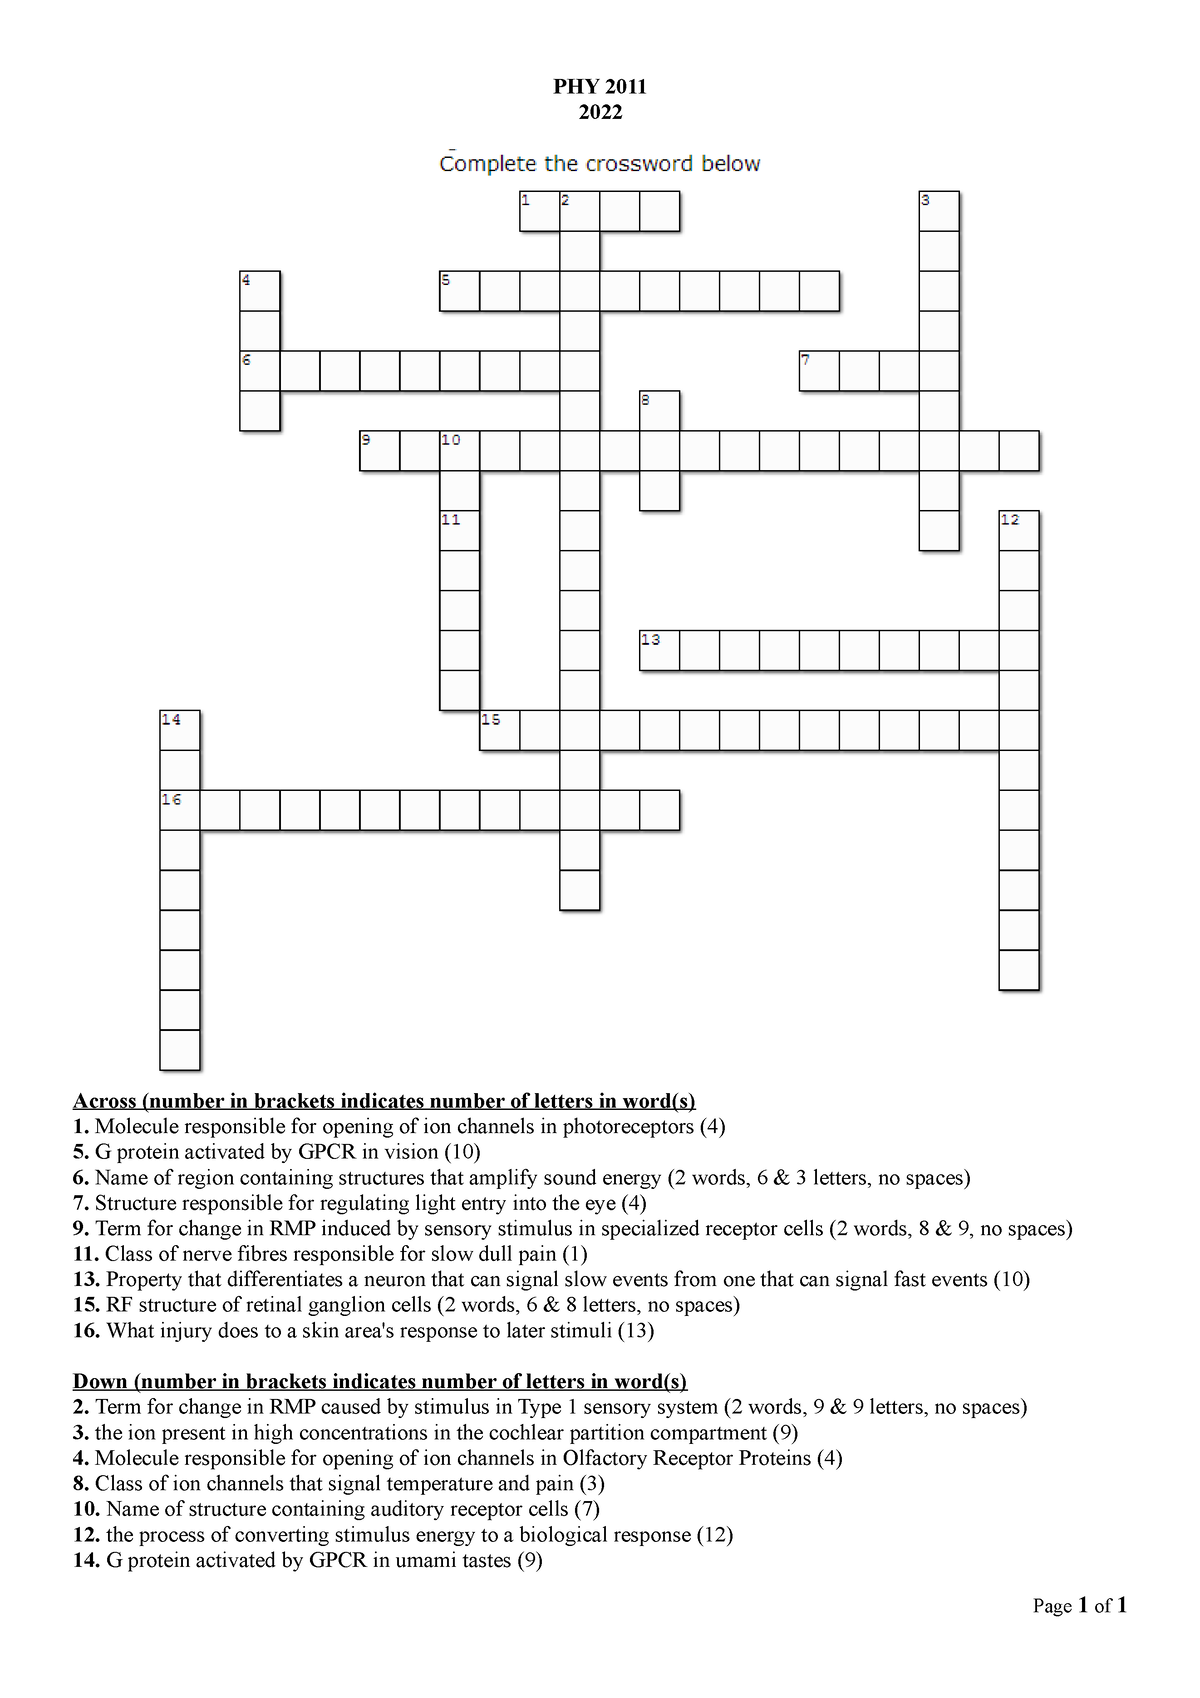 PHY2011 Y2K22 WS 4 Crossword PHY 2011 2022 Across (number in brackets